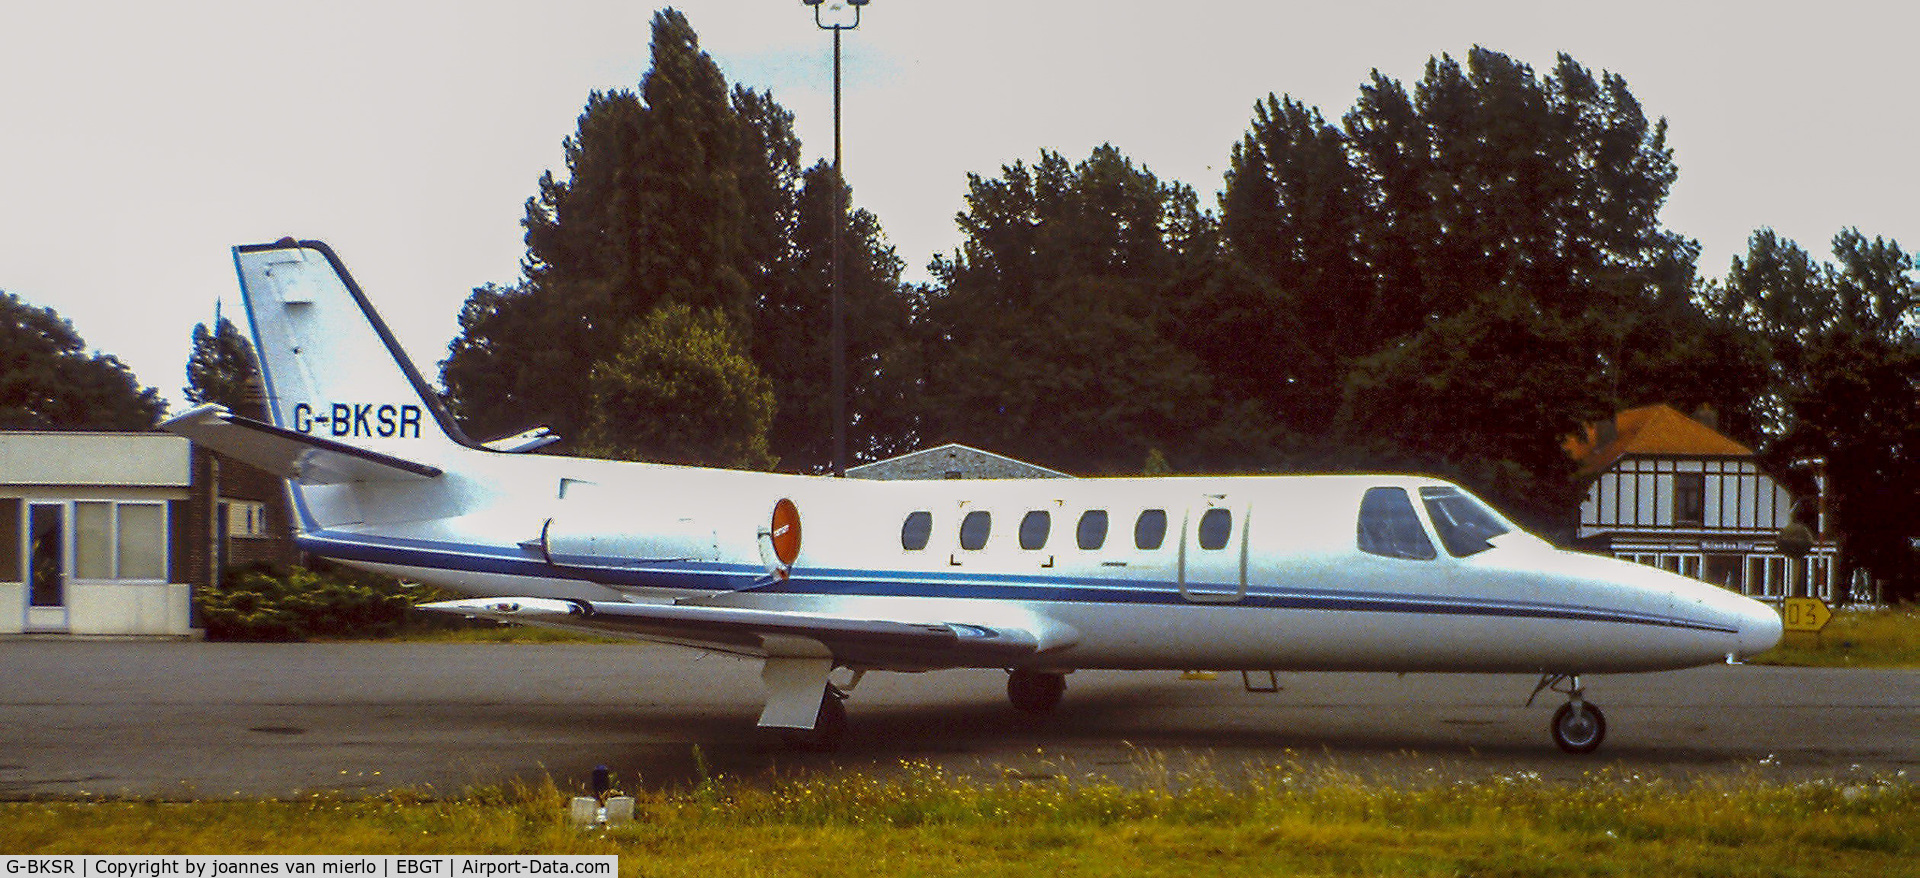 G-BKSR, 1983 Cessna 550 Citation II C/N 550-0469, Quite a surprise at the belgian local airfield Ghent SDW, now a long time ago closed…. A real bizz-jet only spotted once there in years